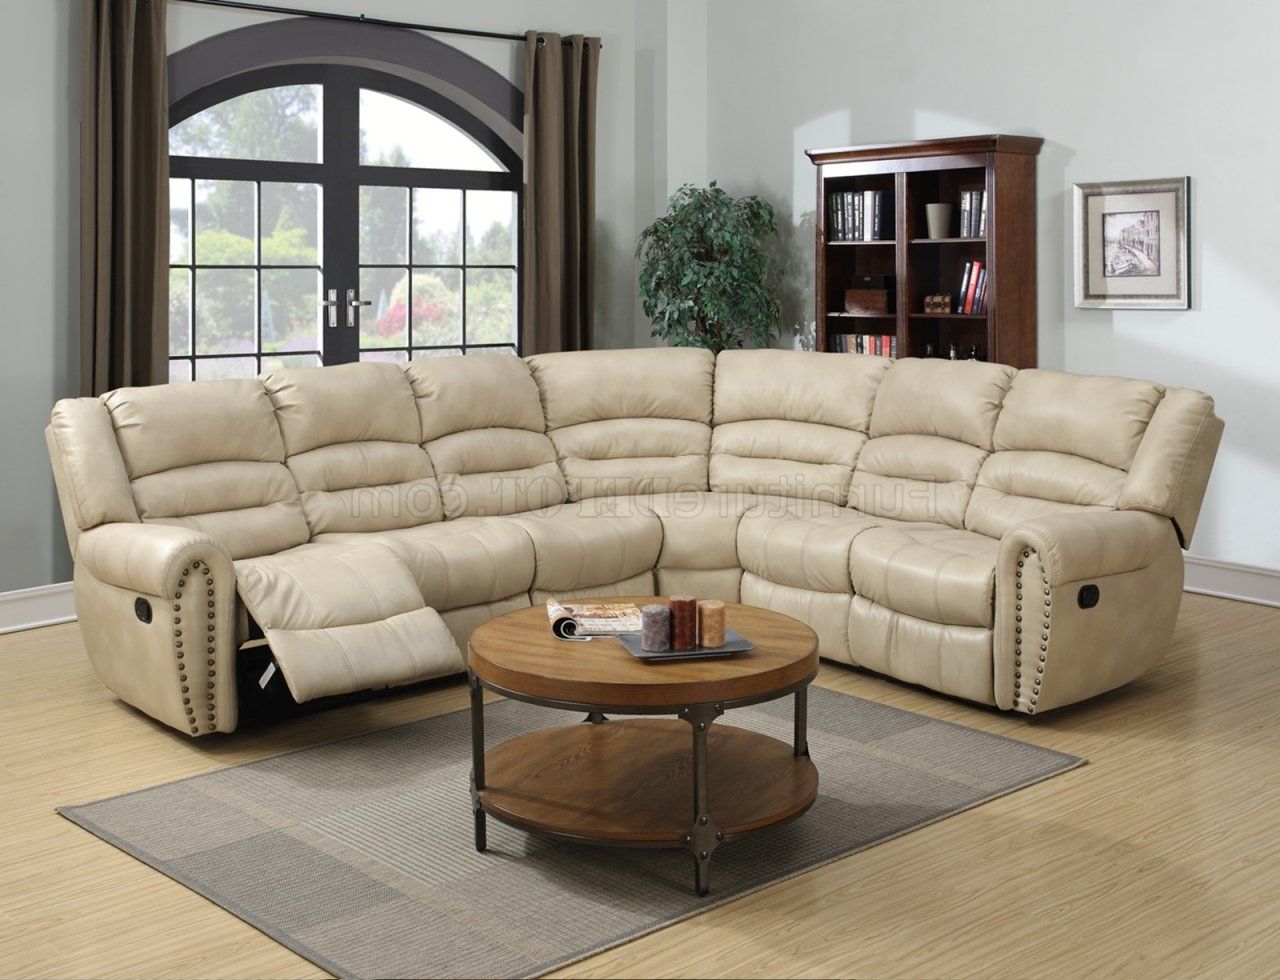 G687 Motion Sectional Sofa In Beige Bonded Leatherglory Regarding Small L Shaped Sectional Sofas In Beige (View 4 of 20)